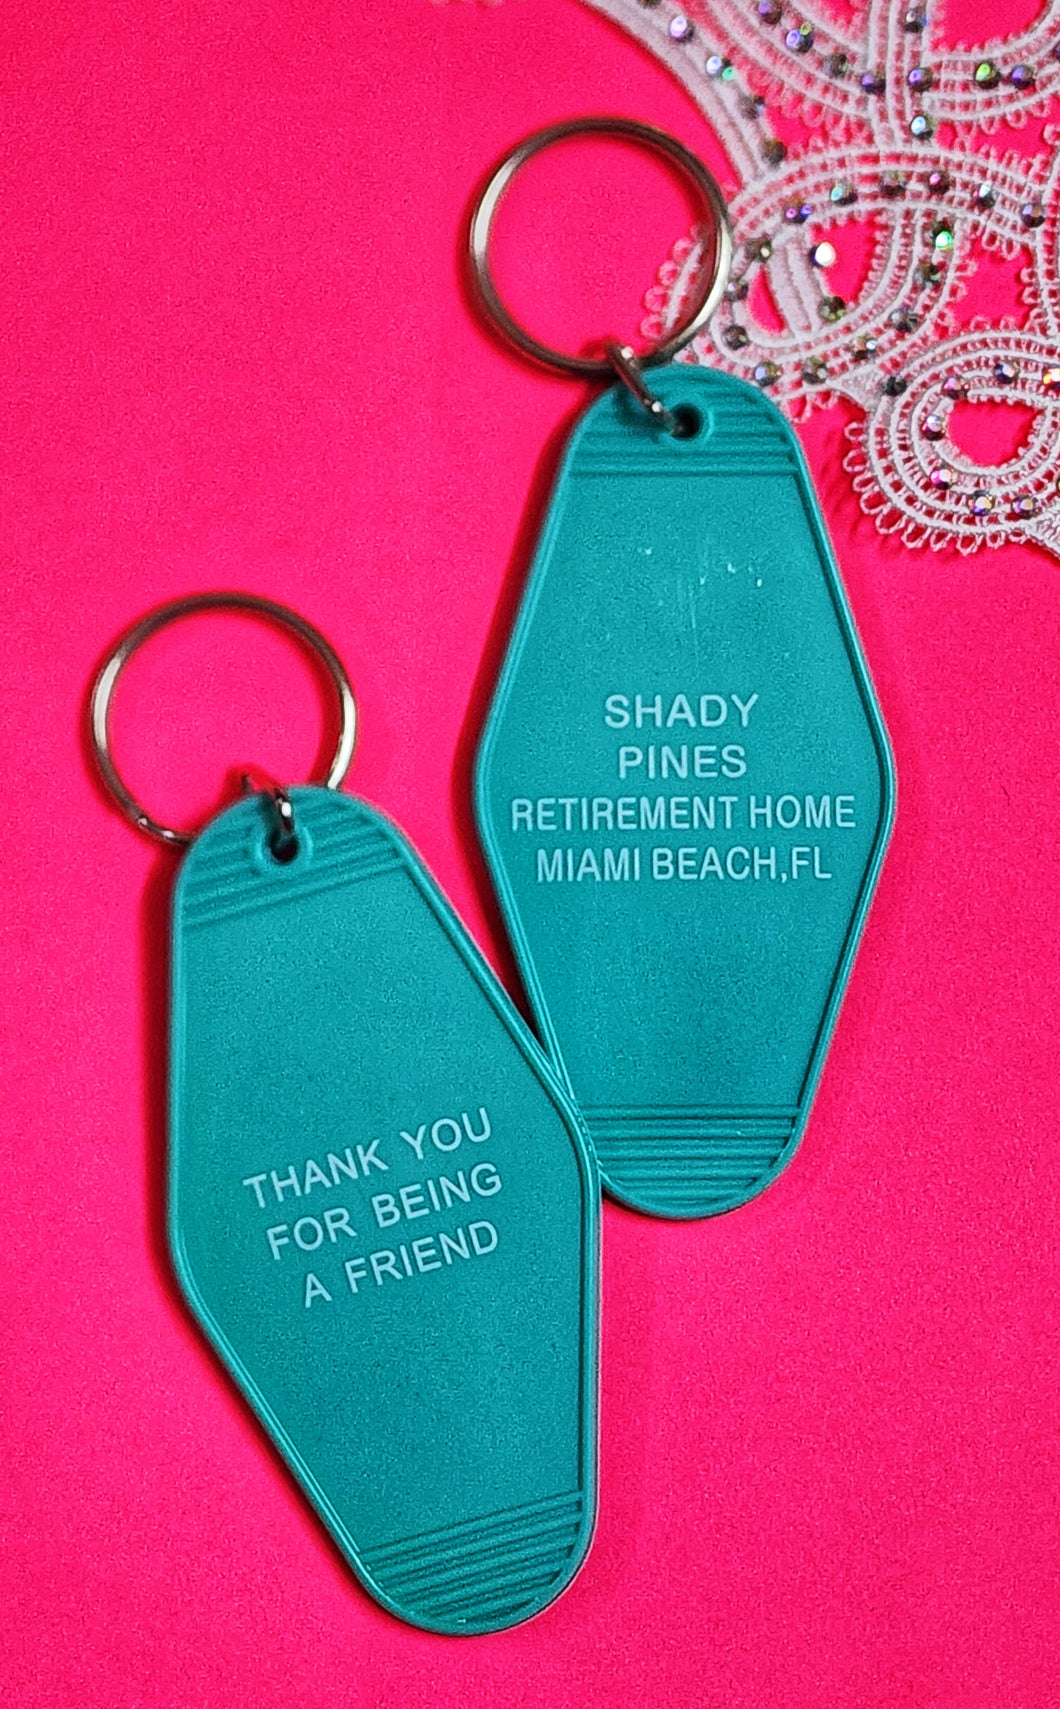 Thank you for being a friend keychain